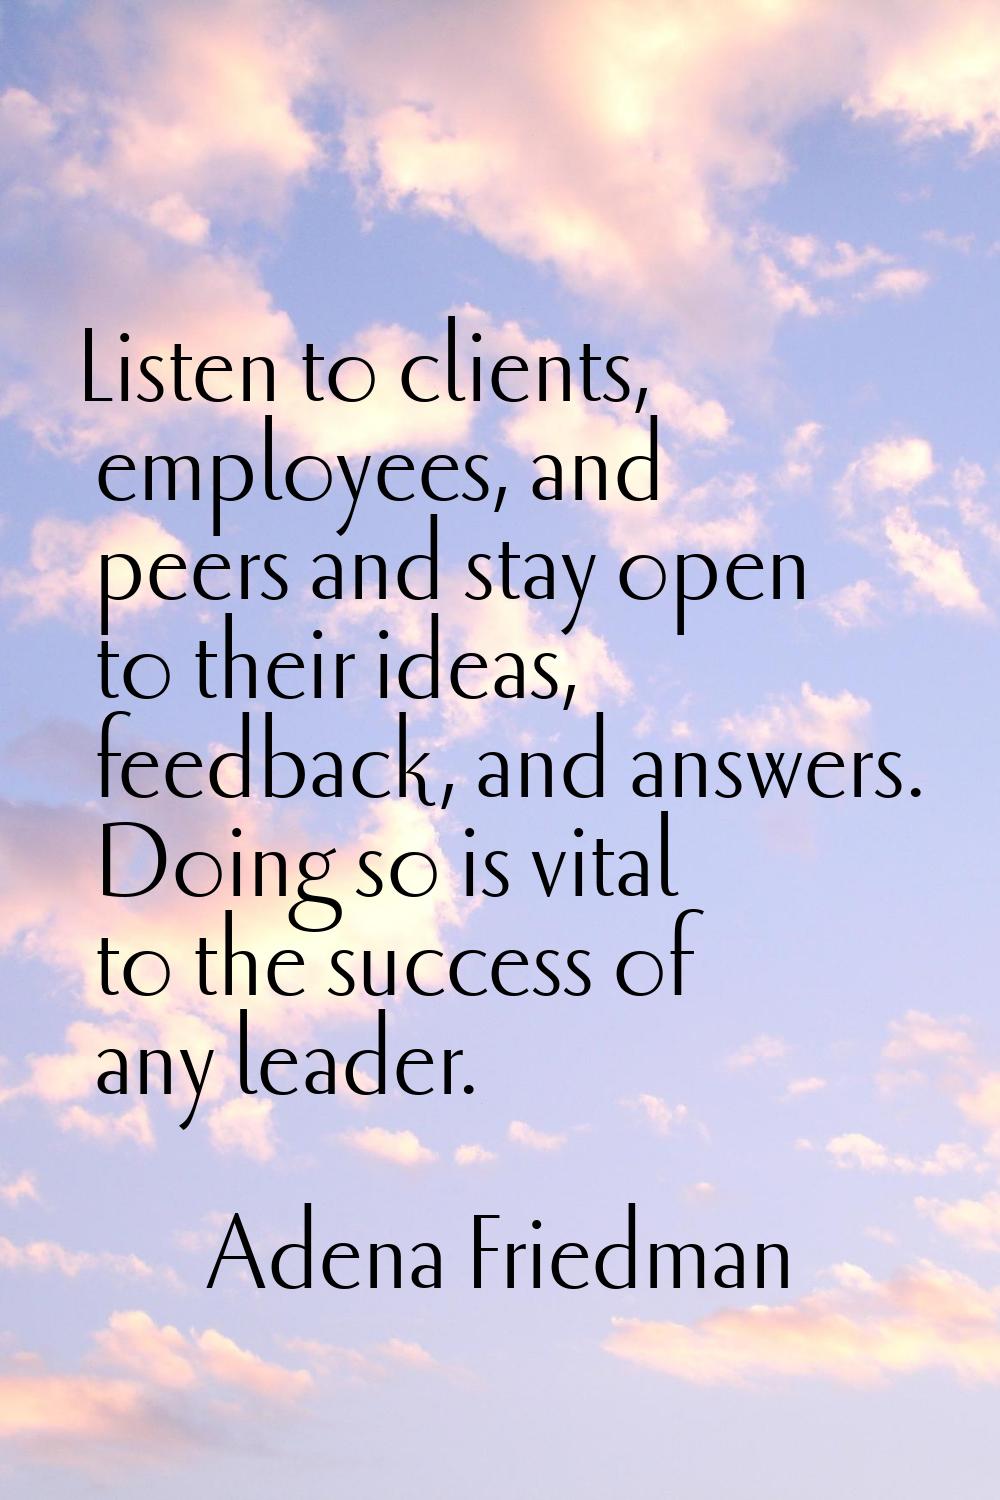 Listen to clients, employees, and peers and stay open to their ideas, feedback, and answers. Doing 